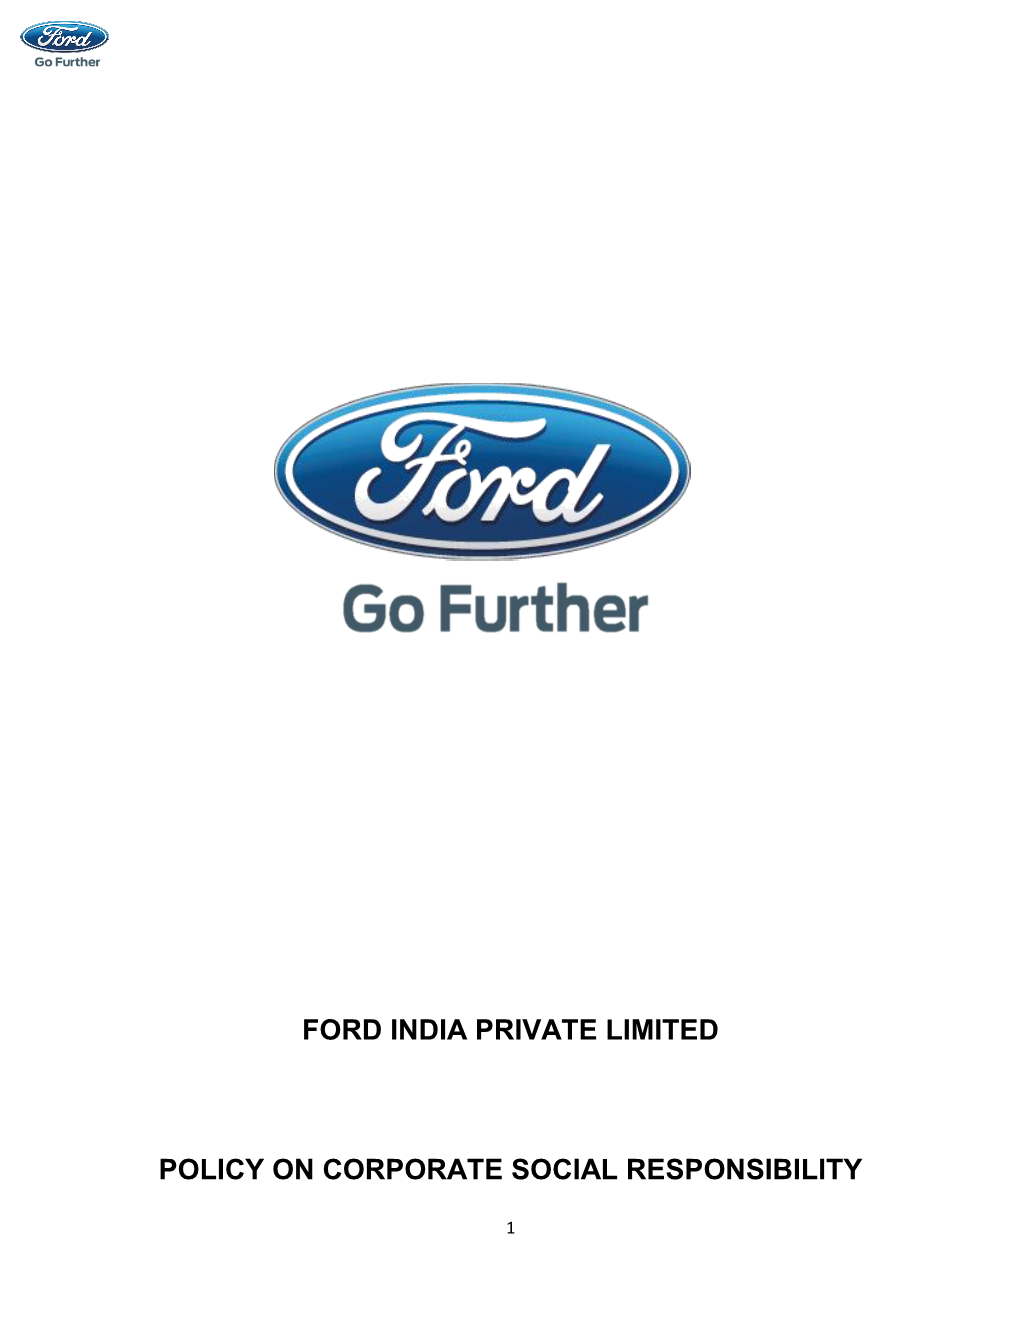 Ford India's CSR Policy